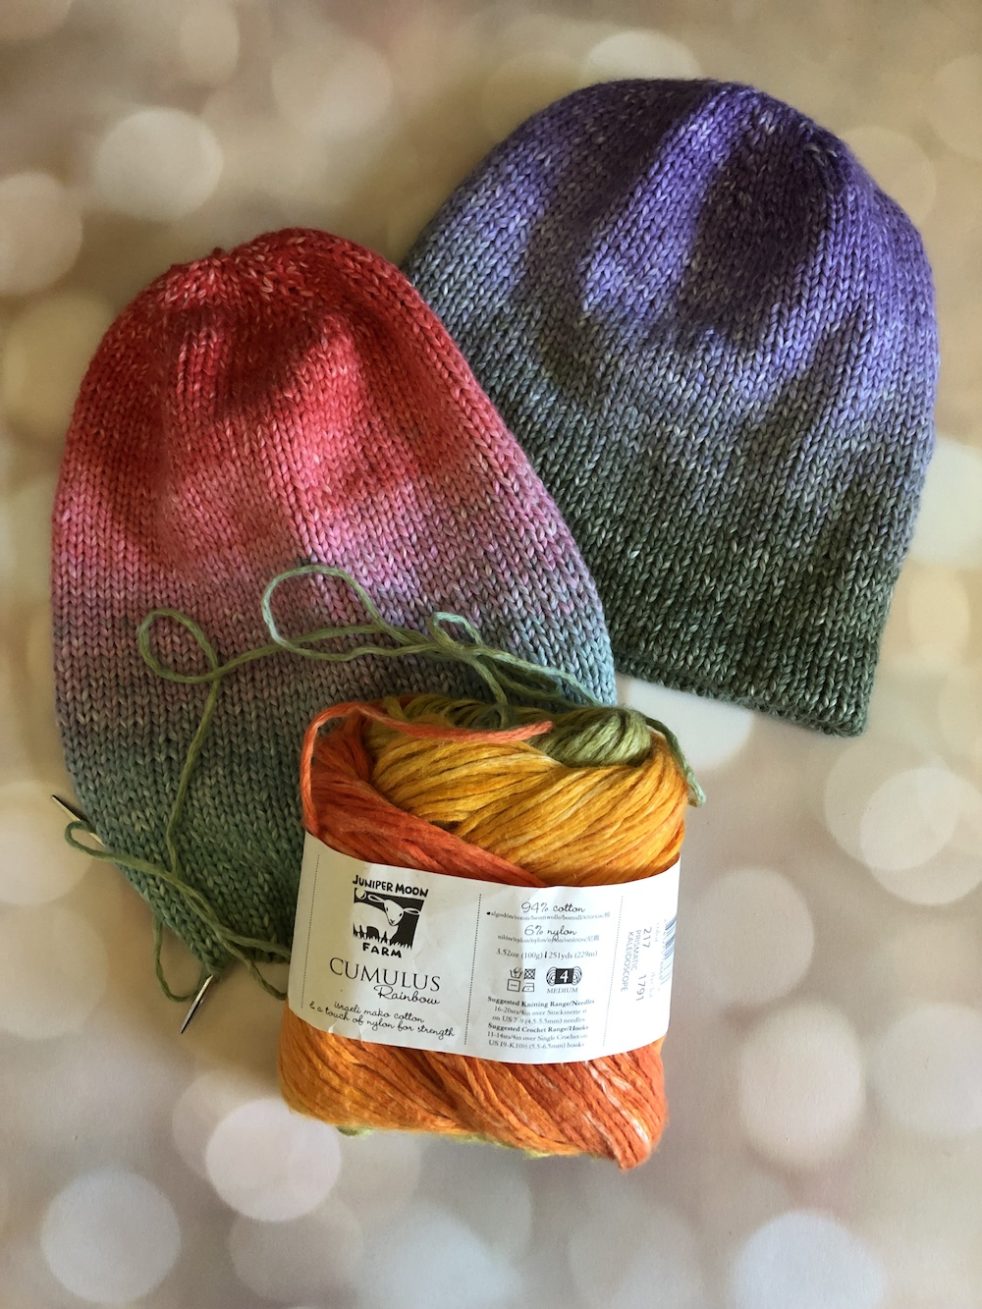 Two hats knit in gradient yarns. One in purple to green is already knit. One in red to green to orange is in progress on the needles.